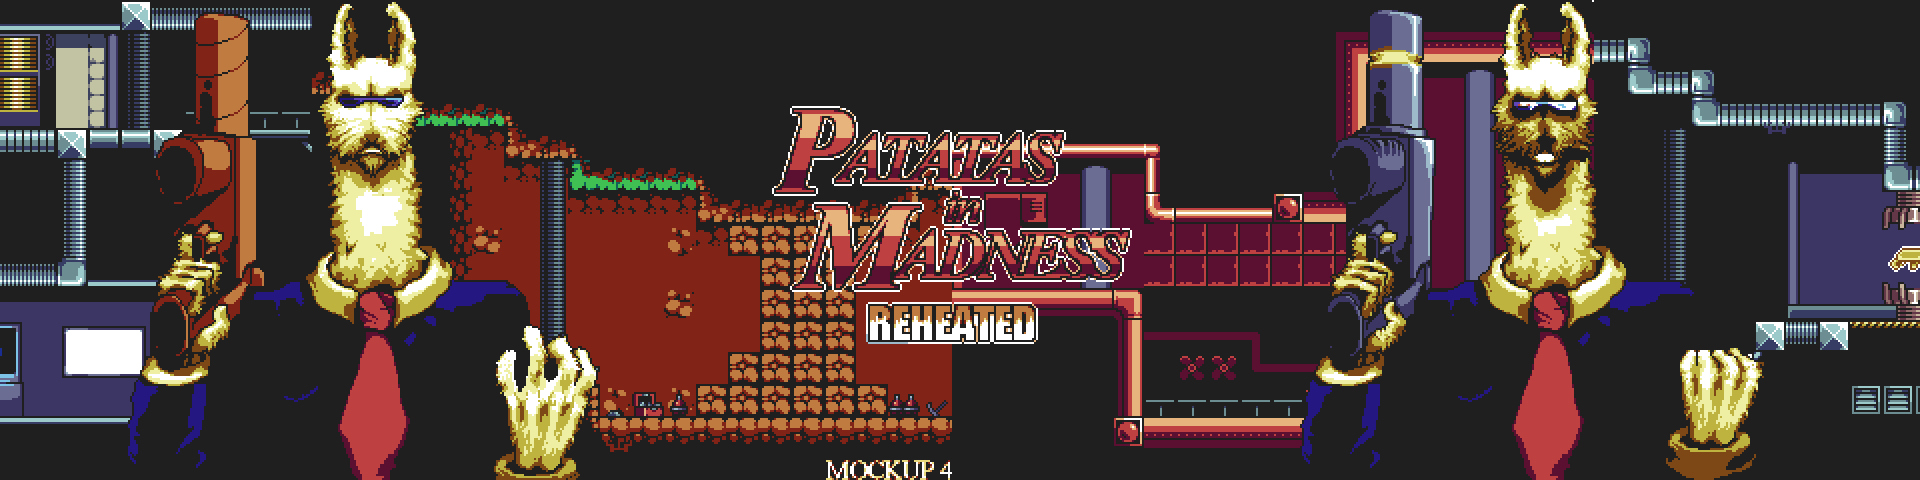 Patatas In Madness: REHEATED (Final Demo)